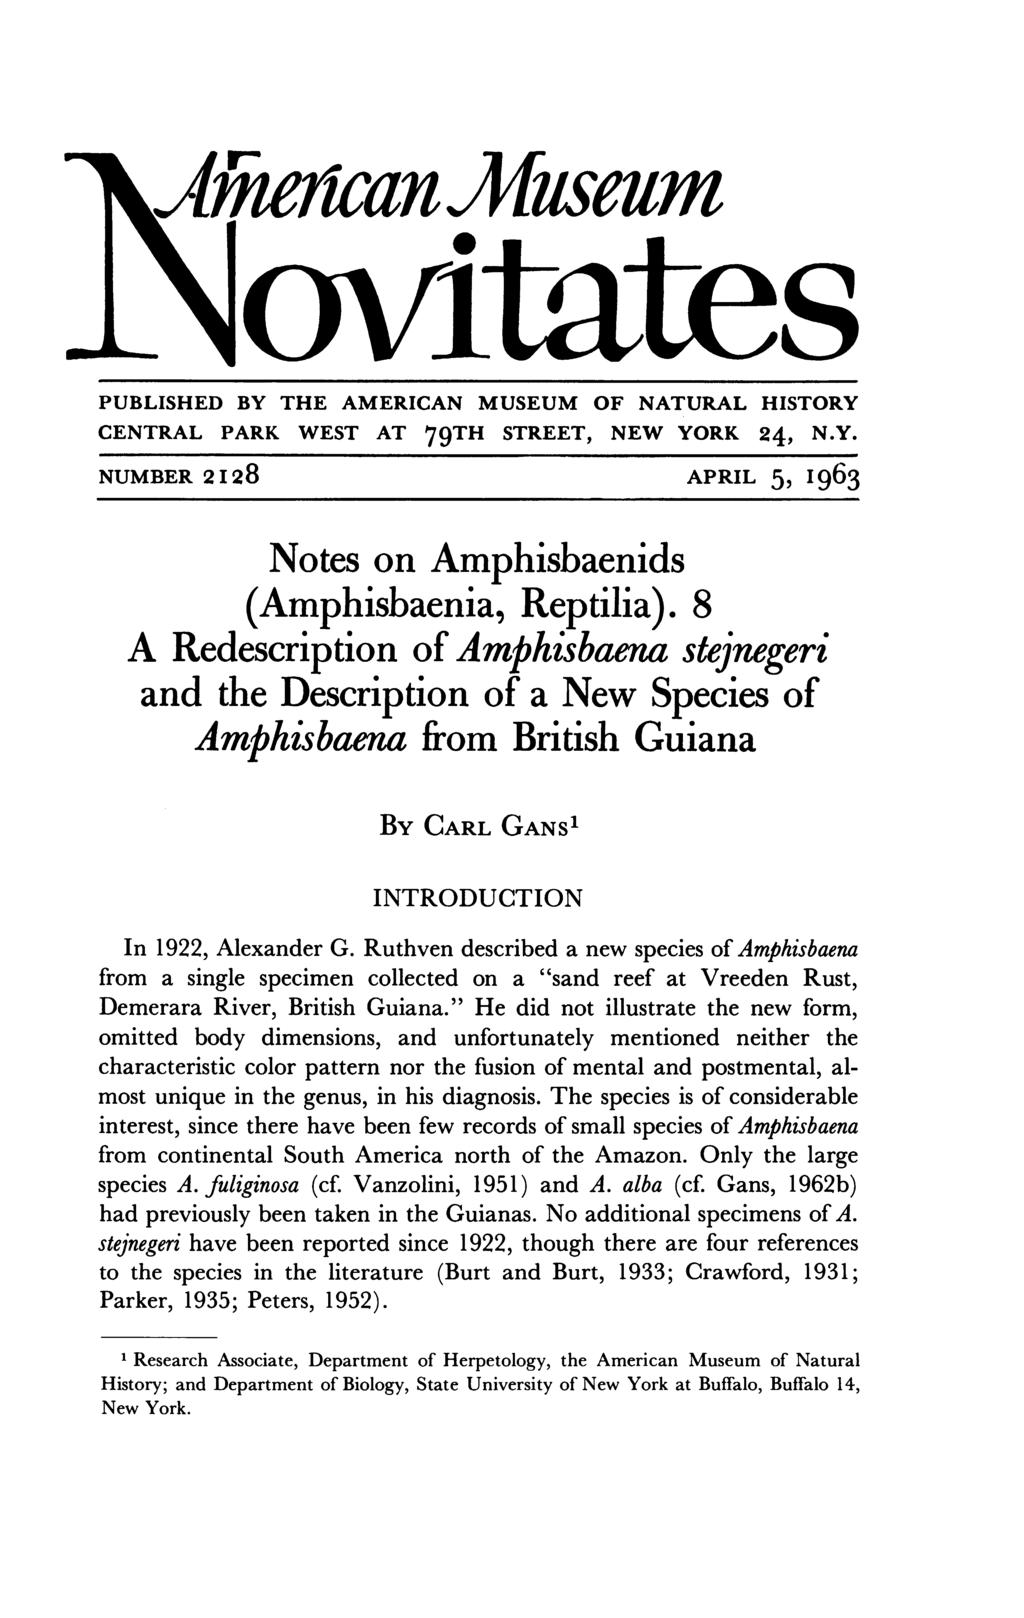 daie'ican)jafseum Iovitate PUBLISHED BY THE AMERICAN MUSEUM OF NATURAL HISTORY CENTRAL PARK WEST AT 79TH STREET, NEW YORK 24, N.Y. NUMBER 2I28 APRIL 5, I963 Notes on Amphisbaenids (Amphisbaenia, Reptilia).